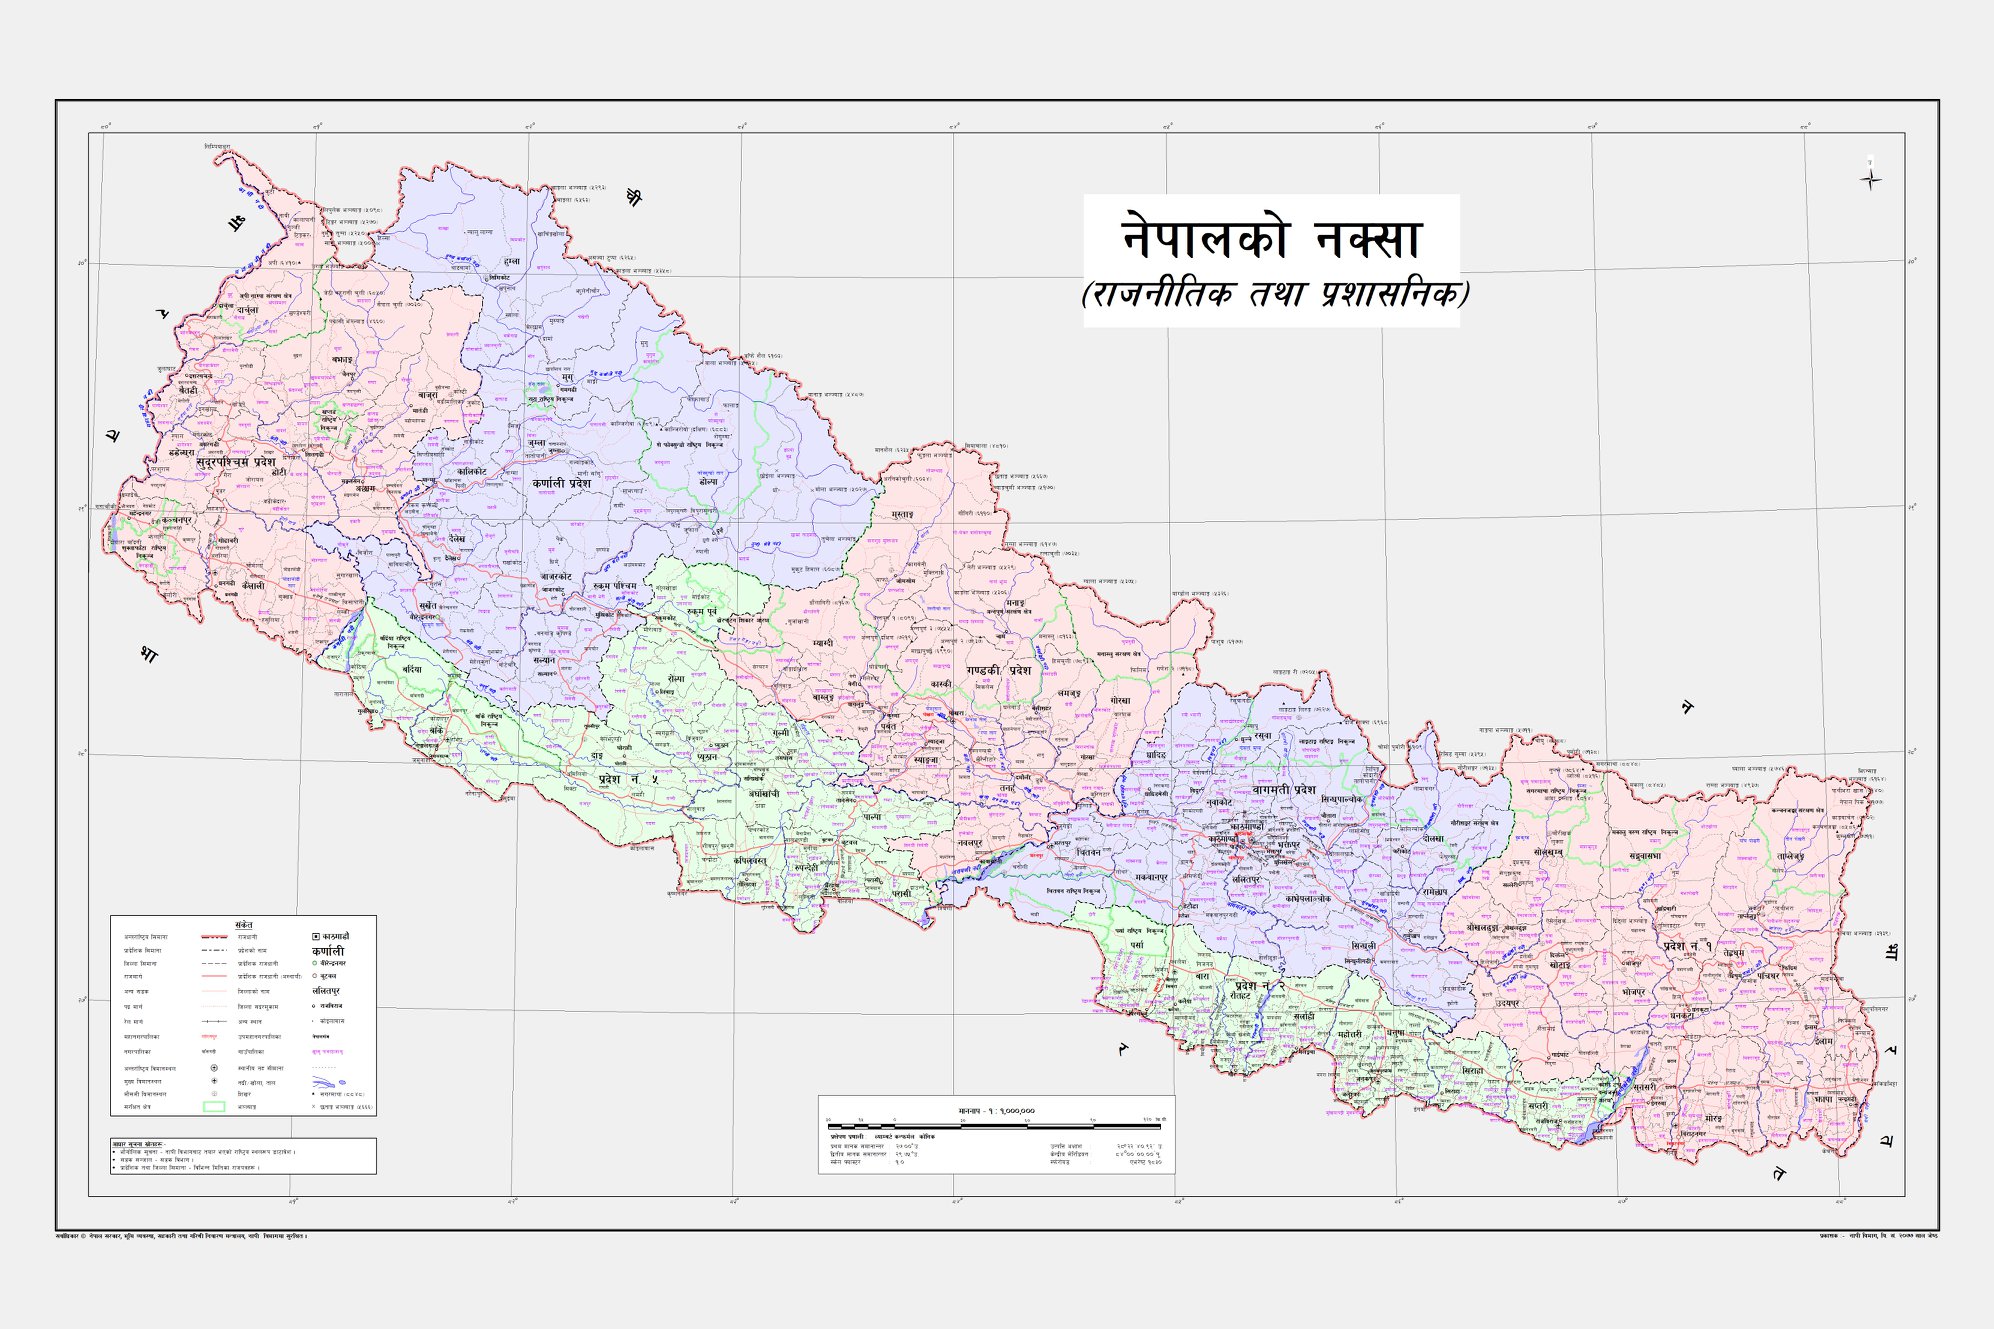 Seven provinces as per the federal system in Nepal on the new political map of the country issued by the government of Nepal, on Monday, May 18, 2020, and launched on Wednesday, May 20, 2020